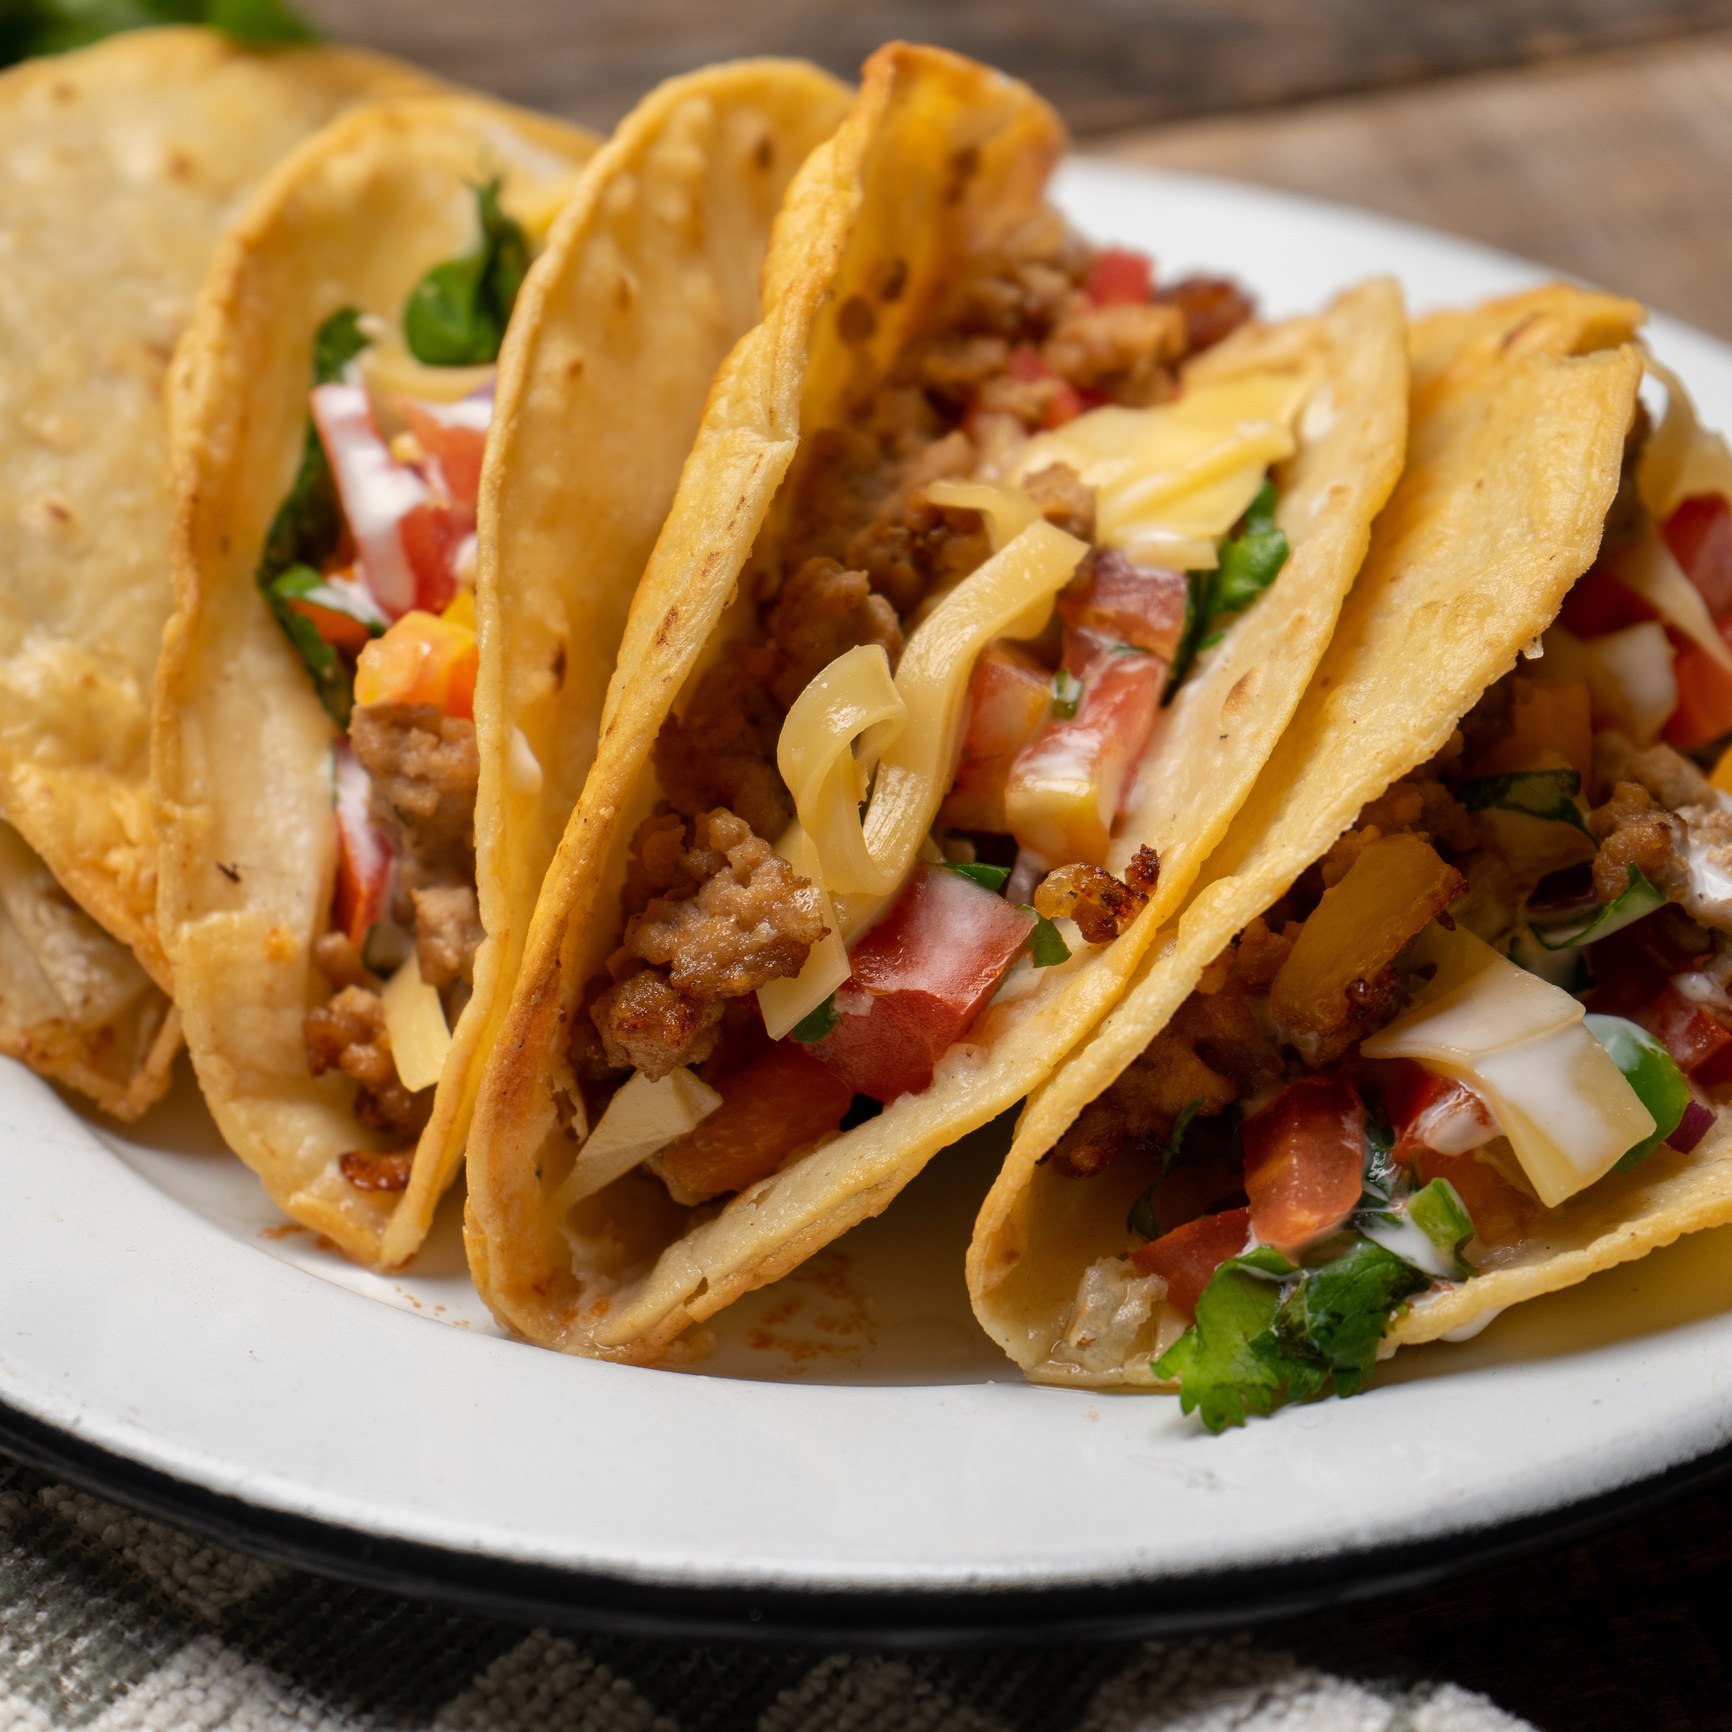 Mexican hard-shell tacos filled with meat and vegetables.